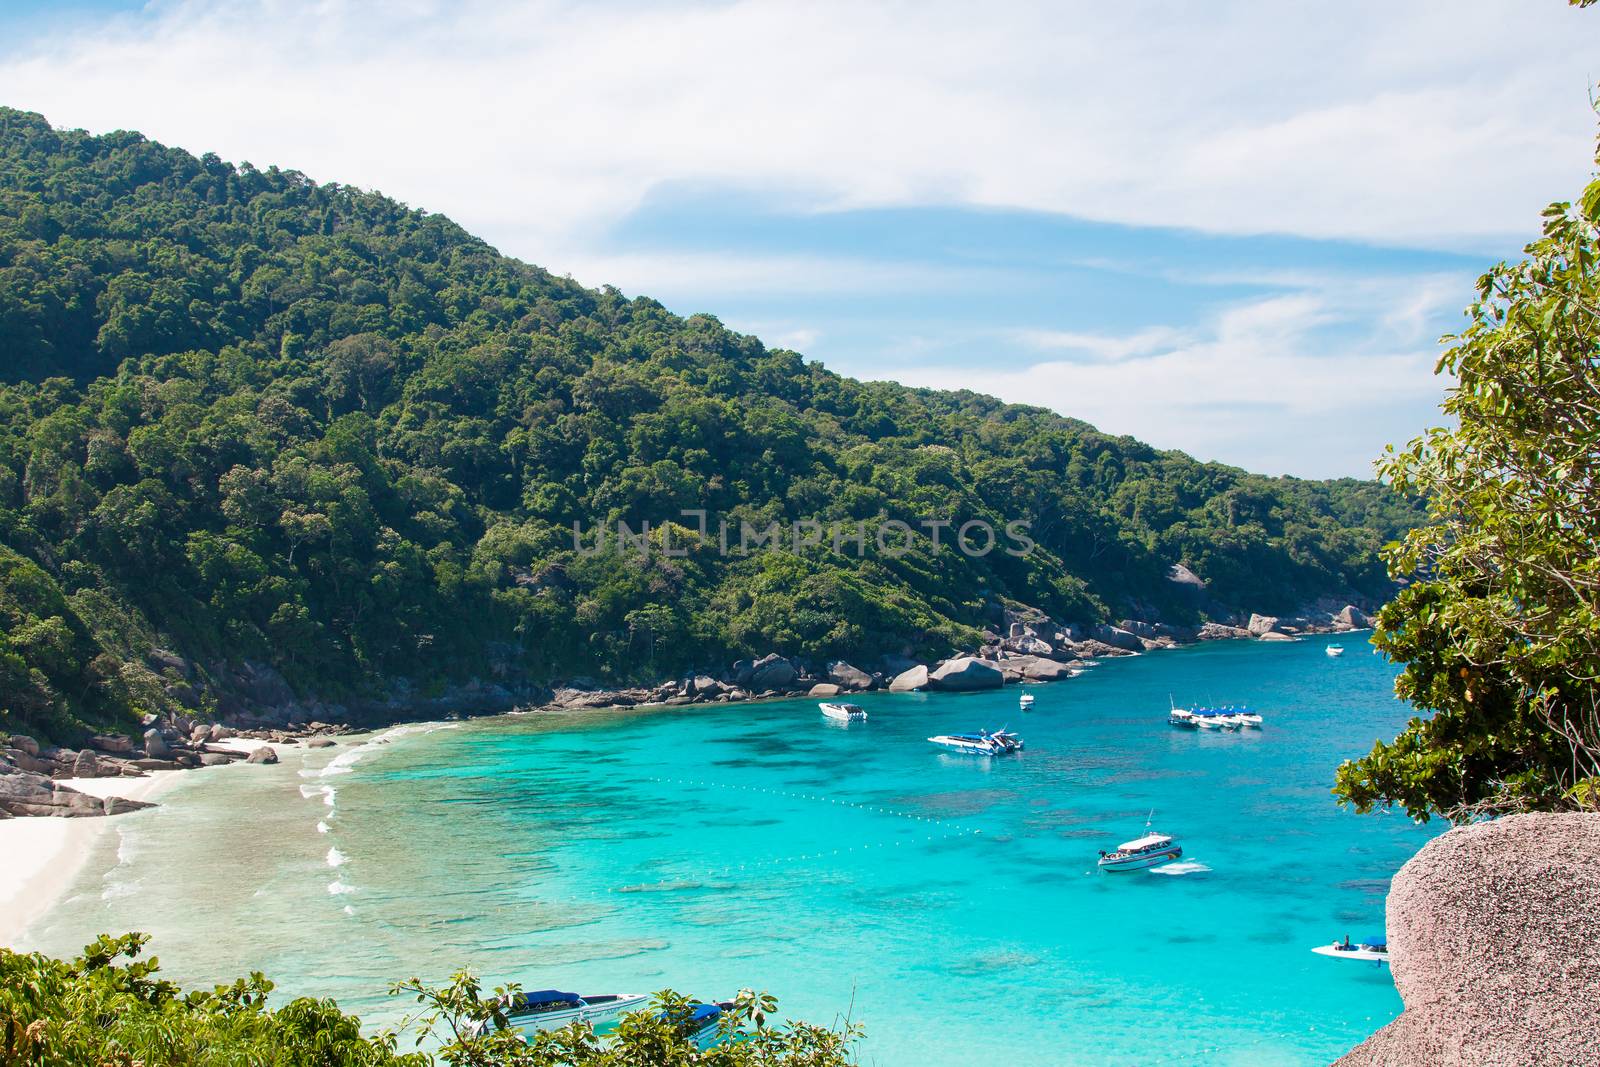 Phuket, Thailand - December 21, 2015: Beautiful view of tropical paradise beach with rocks and green exotic foliage